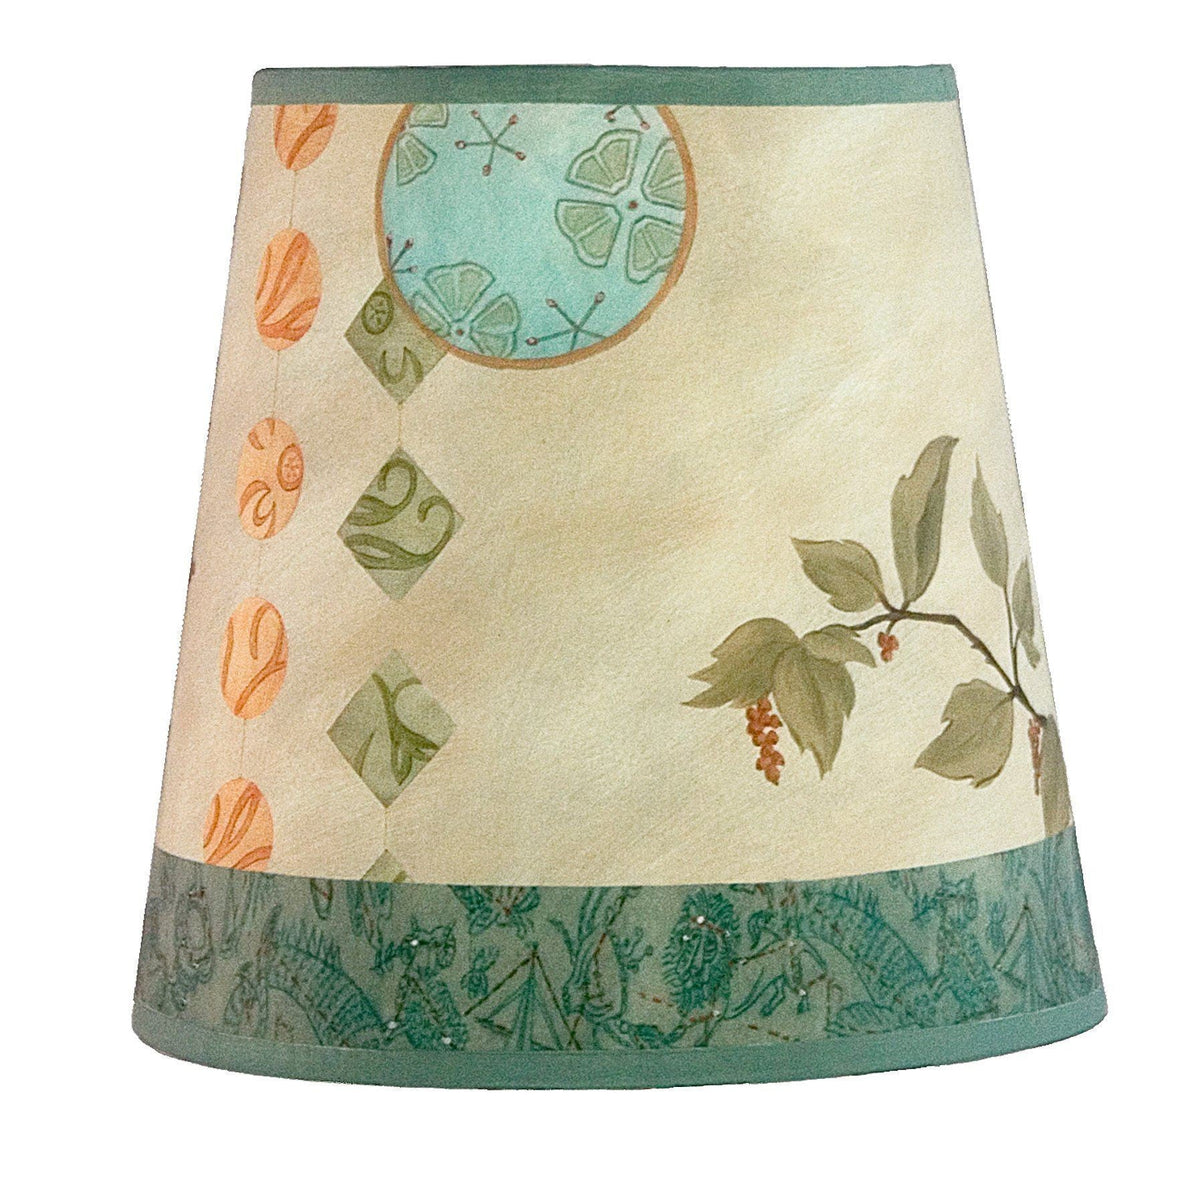 Janna Ugone &amp; Co Lamp Shades Small Drum Lamp Shade in Celestial Leaf